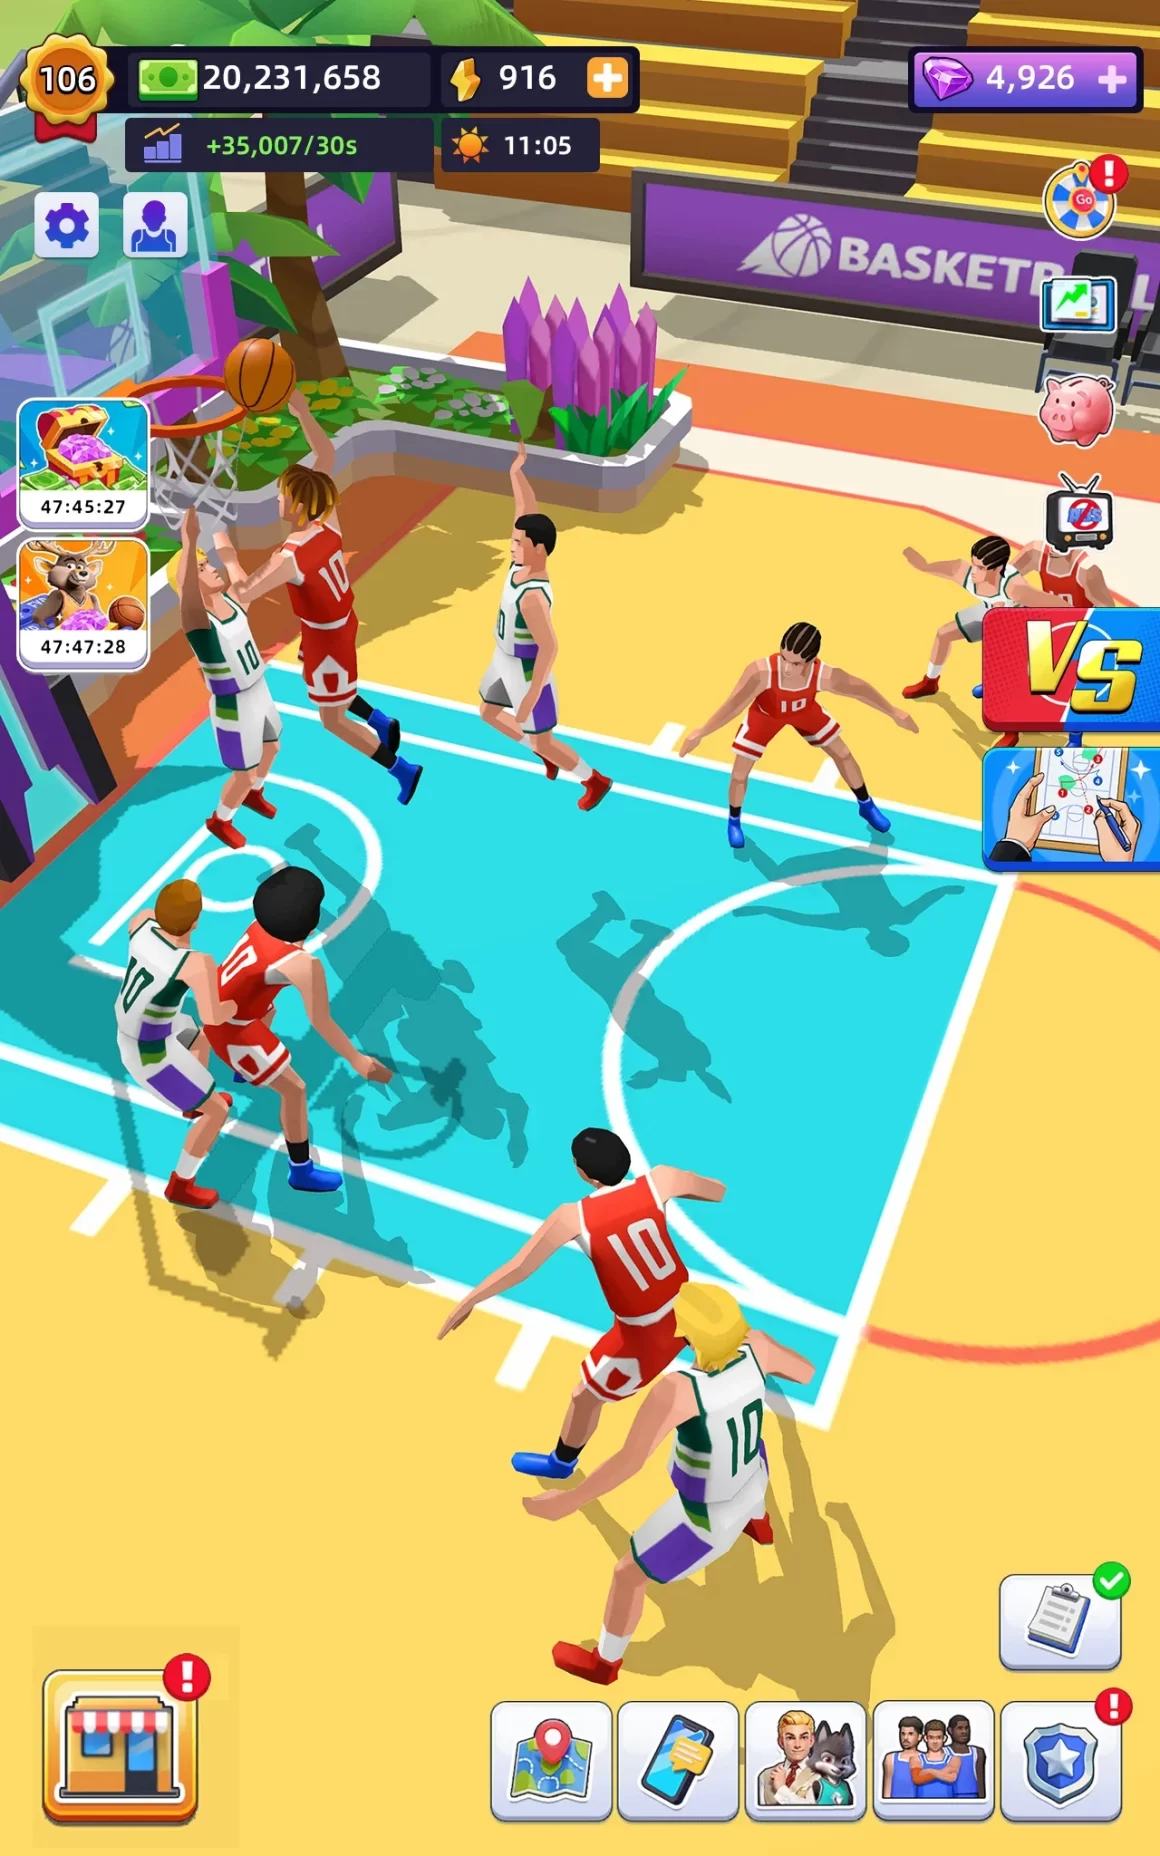 unnamed 28 4 1160x1856 - Idle Basketball Arena Tycoon Mod Apk V1.2.1 (Unlimited Money)